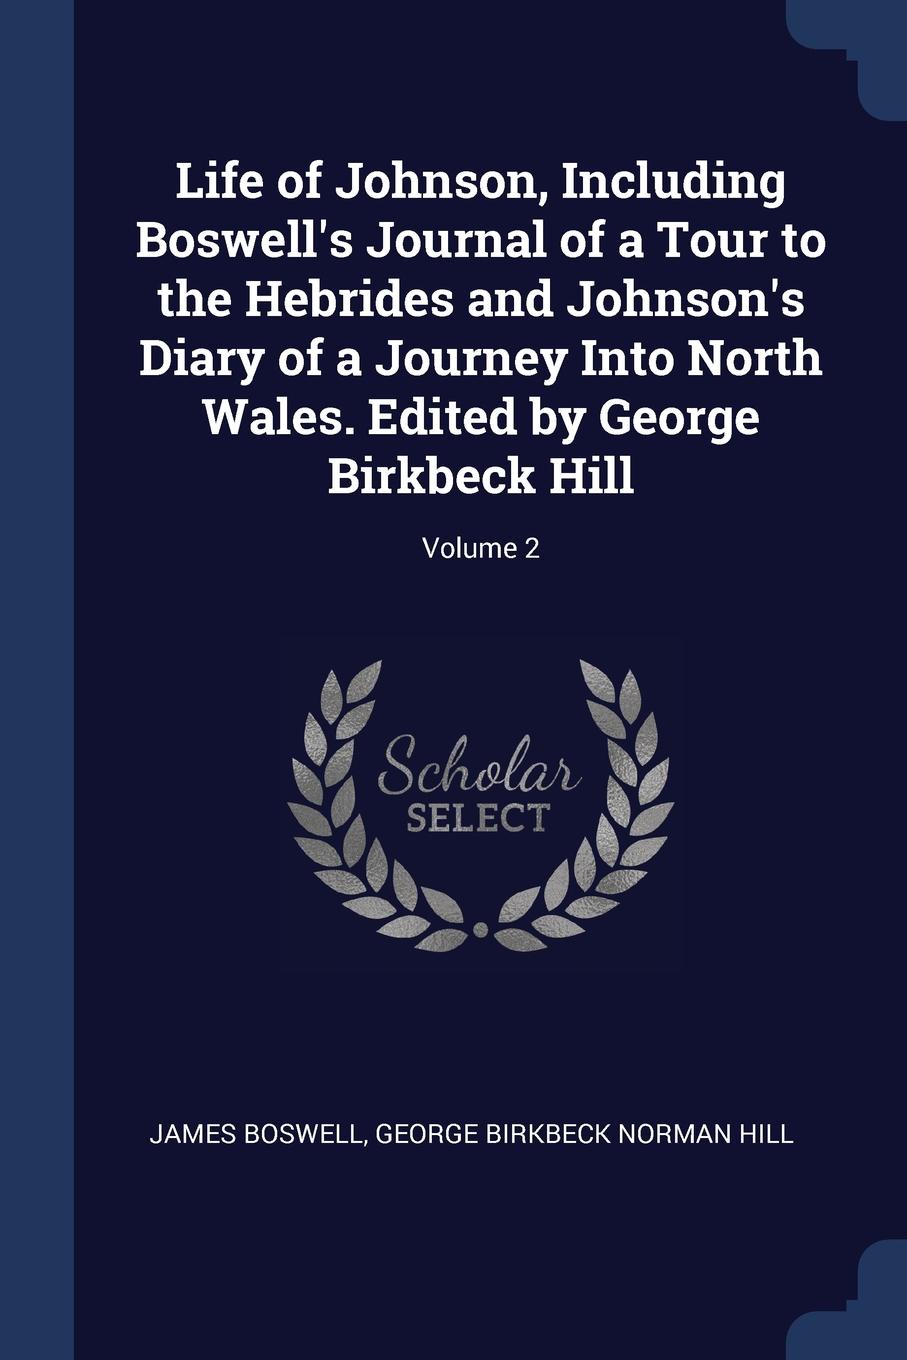 Life of Johnson, Including Boswell.s Journal of a Tour to the Hebrides and Johnson.s Diary of a Journey Into North Wales. Edited by George Birkbeck Hill; Volume 2